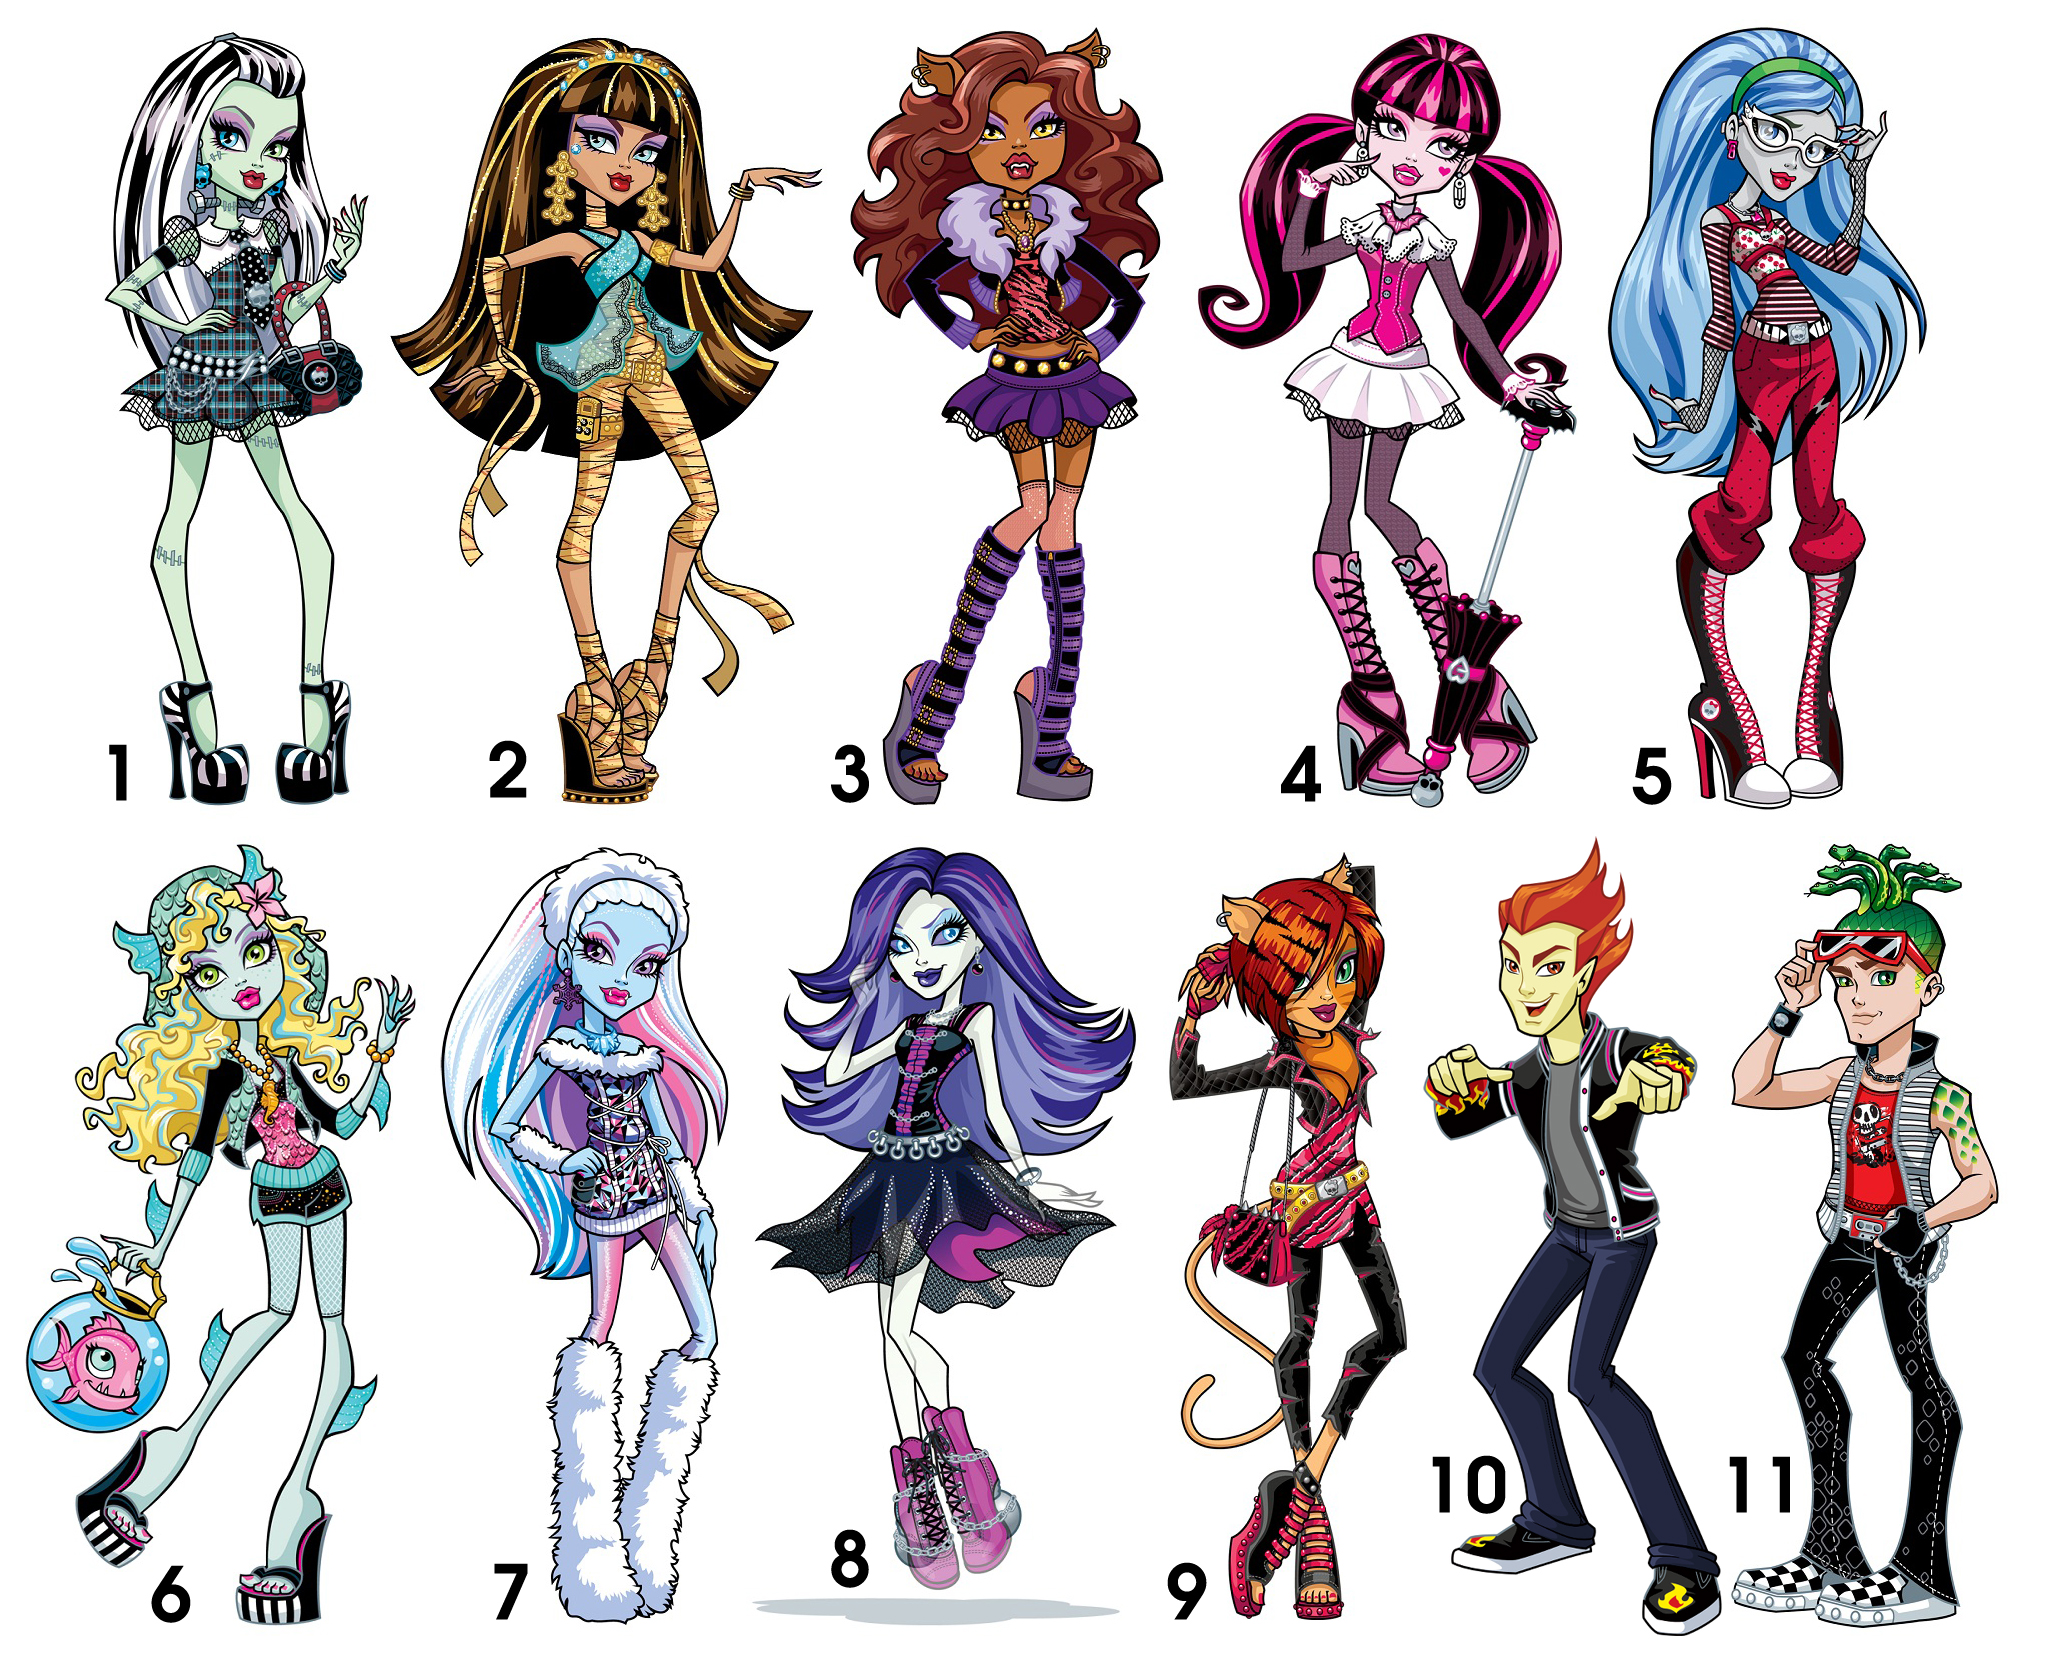 Update You can see the album with the entries here: Monster High Collab alb...